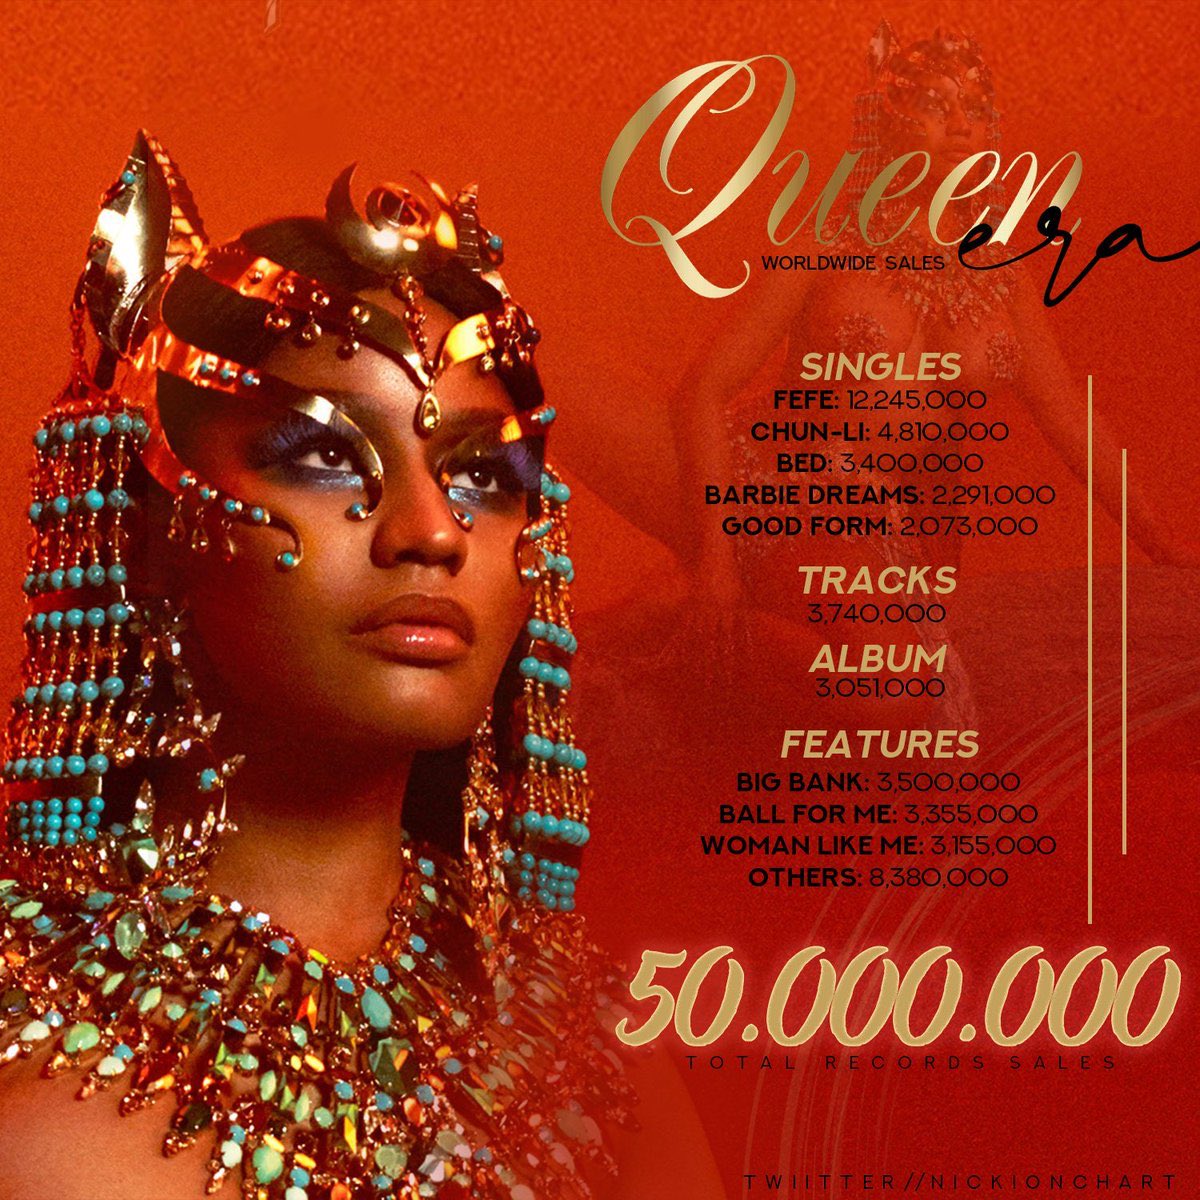 “Queen sleezy era and they never see me ever”Queen is Nicki Minaj’s fourth studio album which she released on August 10, 2018. “Sleaze” is a term given to a person who is reckless or laid back and who really doesn’t give a damn about anything. Silent but deadly.